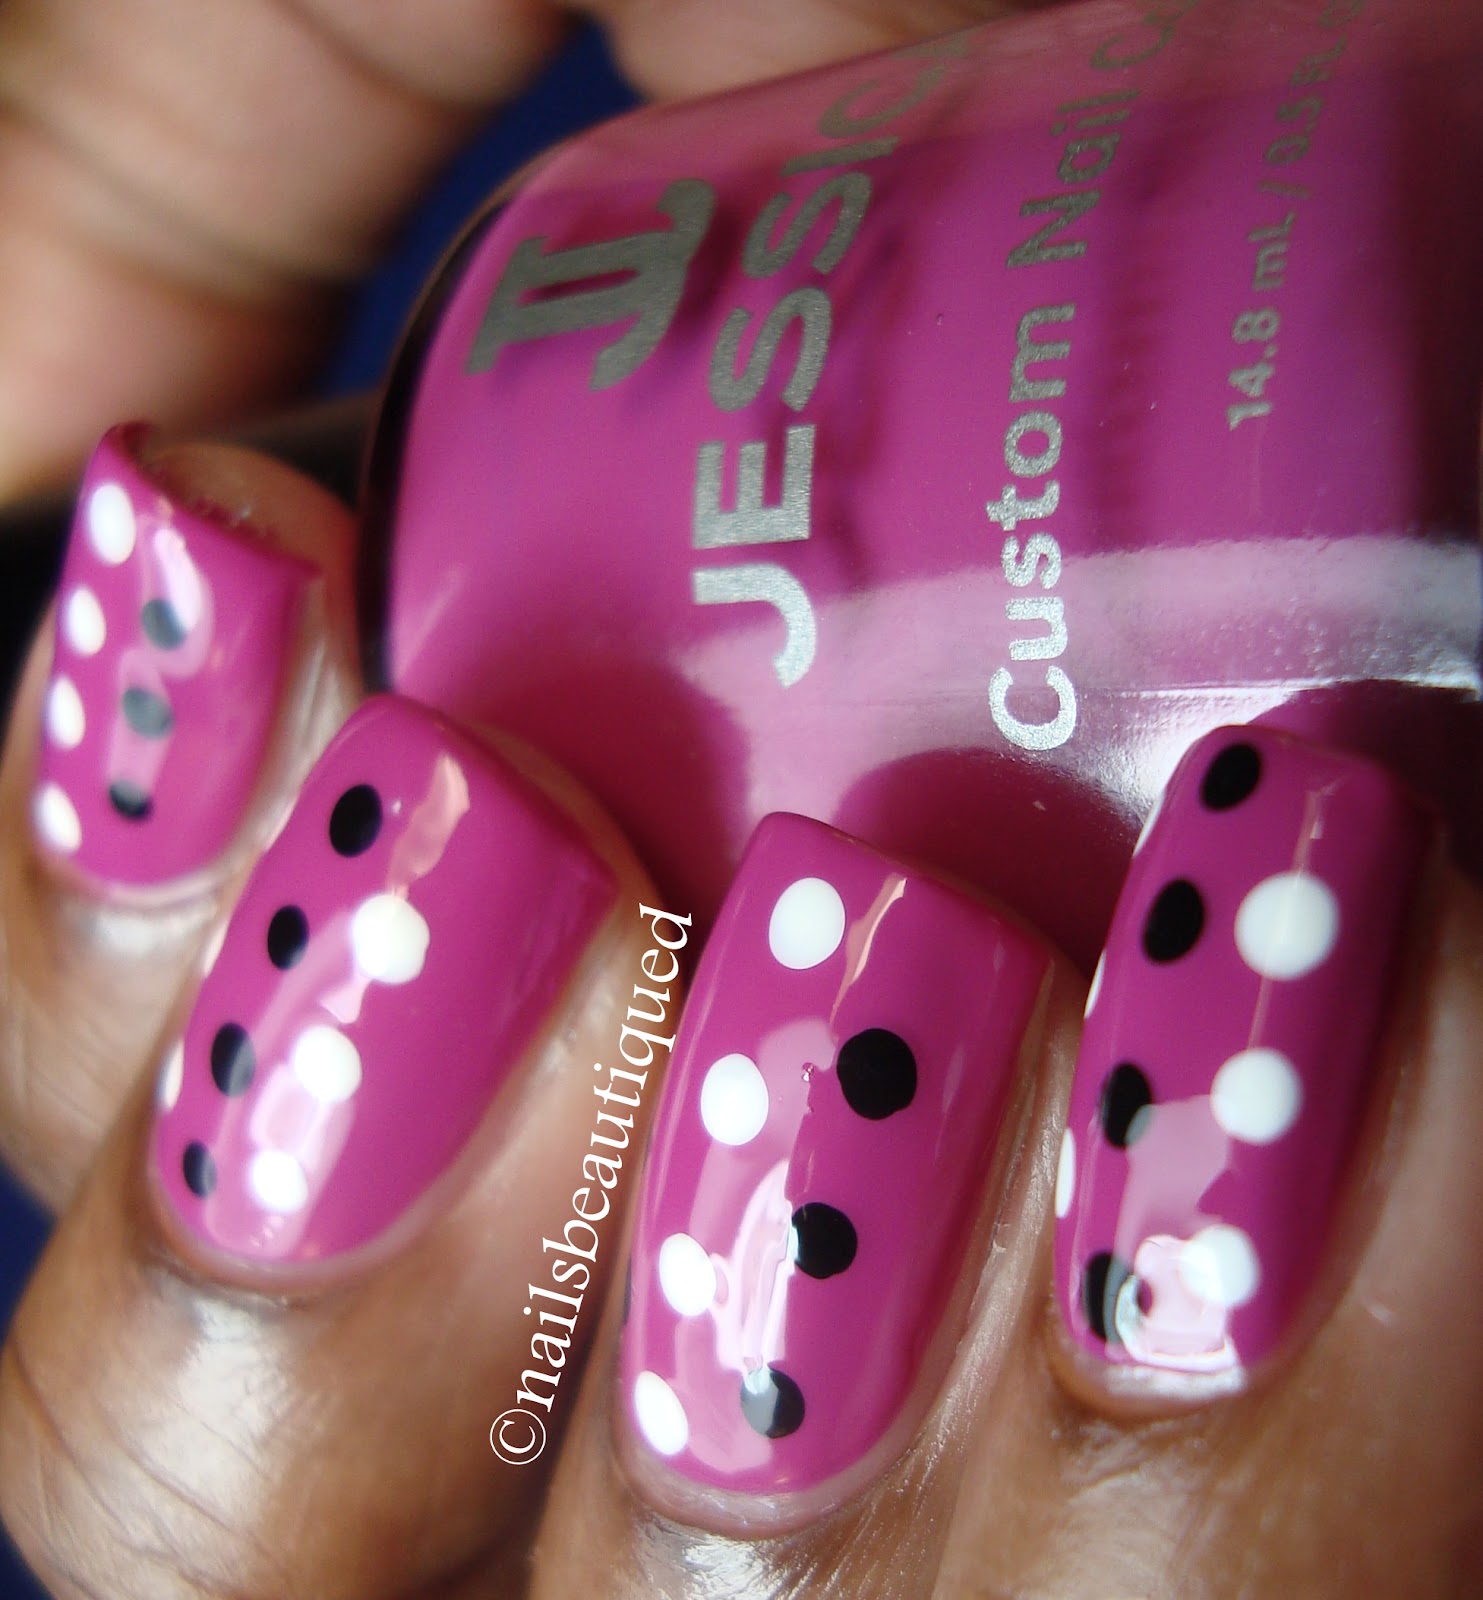 Polka Dot Nail Art Design. Hope you like it. What are you wearing today?